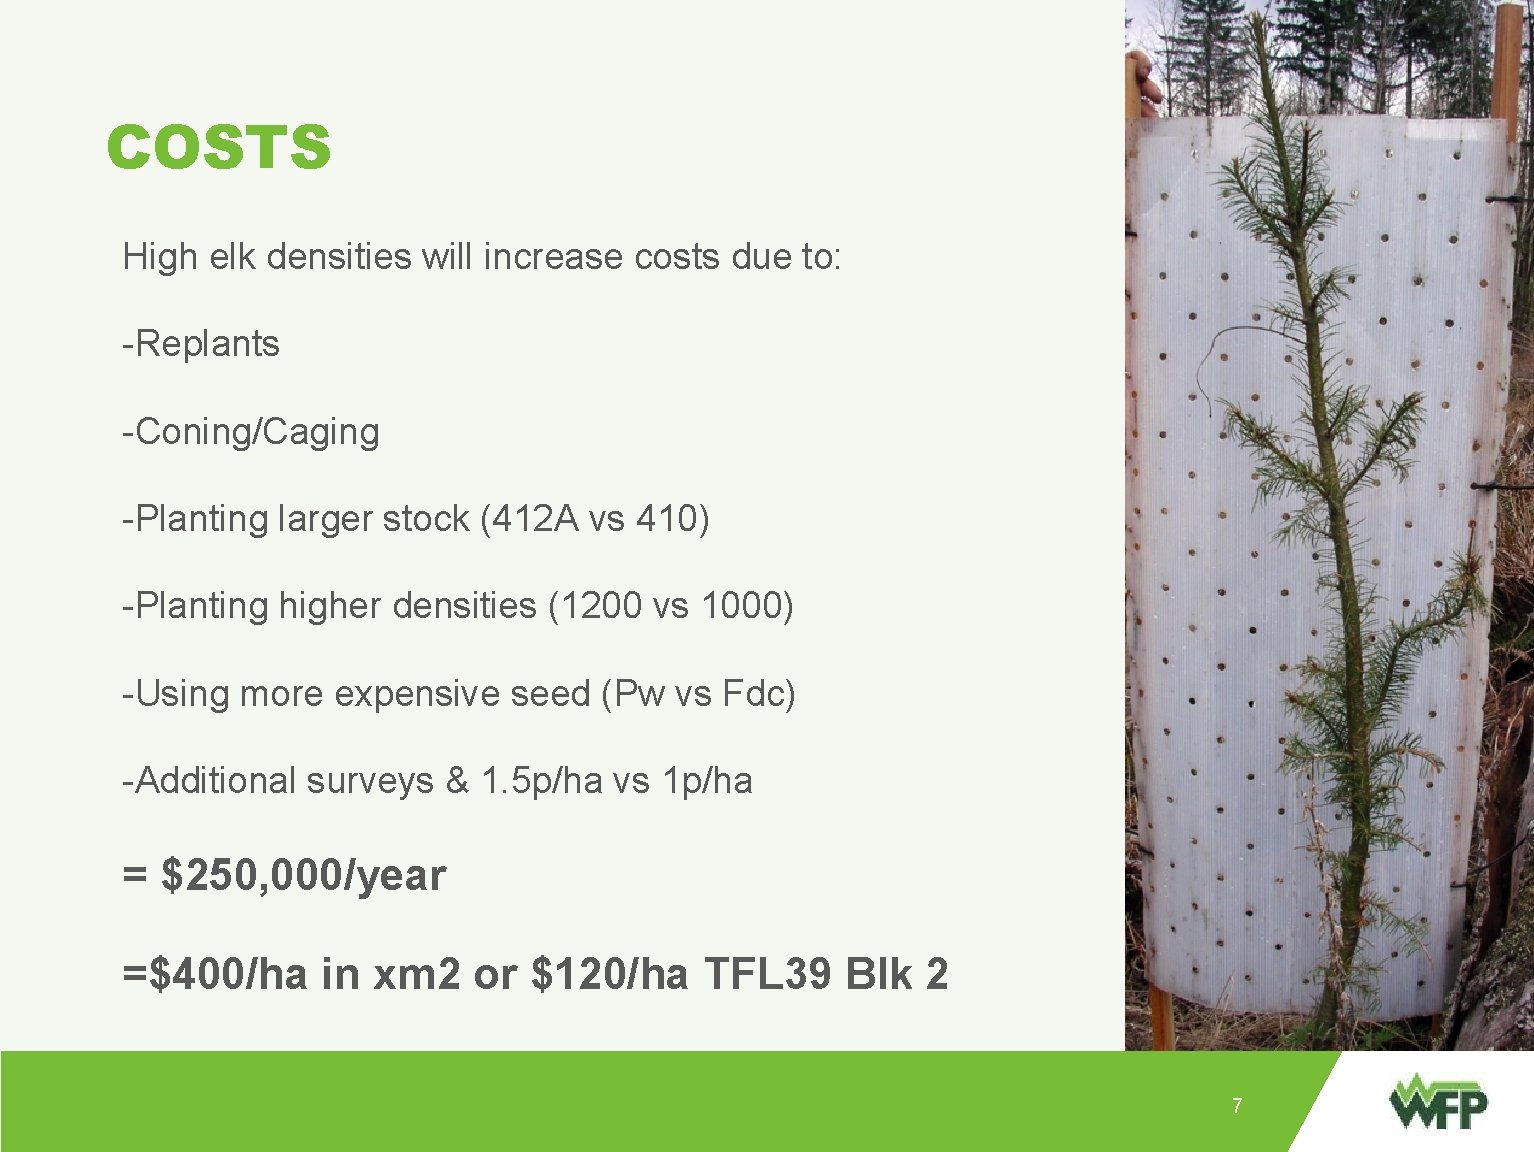 COSTS High elk densities will increase costs due to: -Replants -Coning/Caging -Planting larger stock